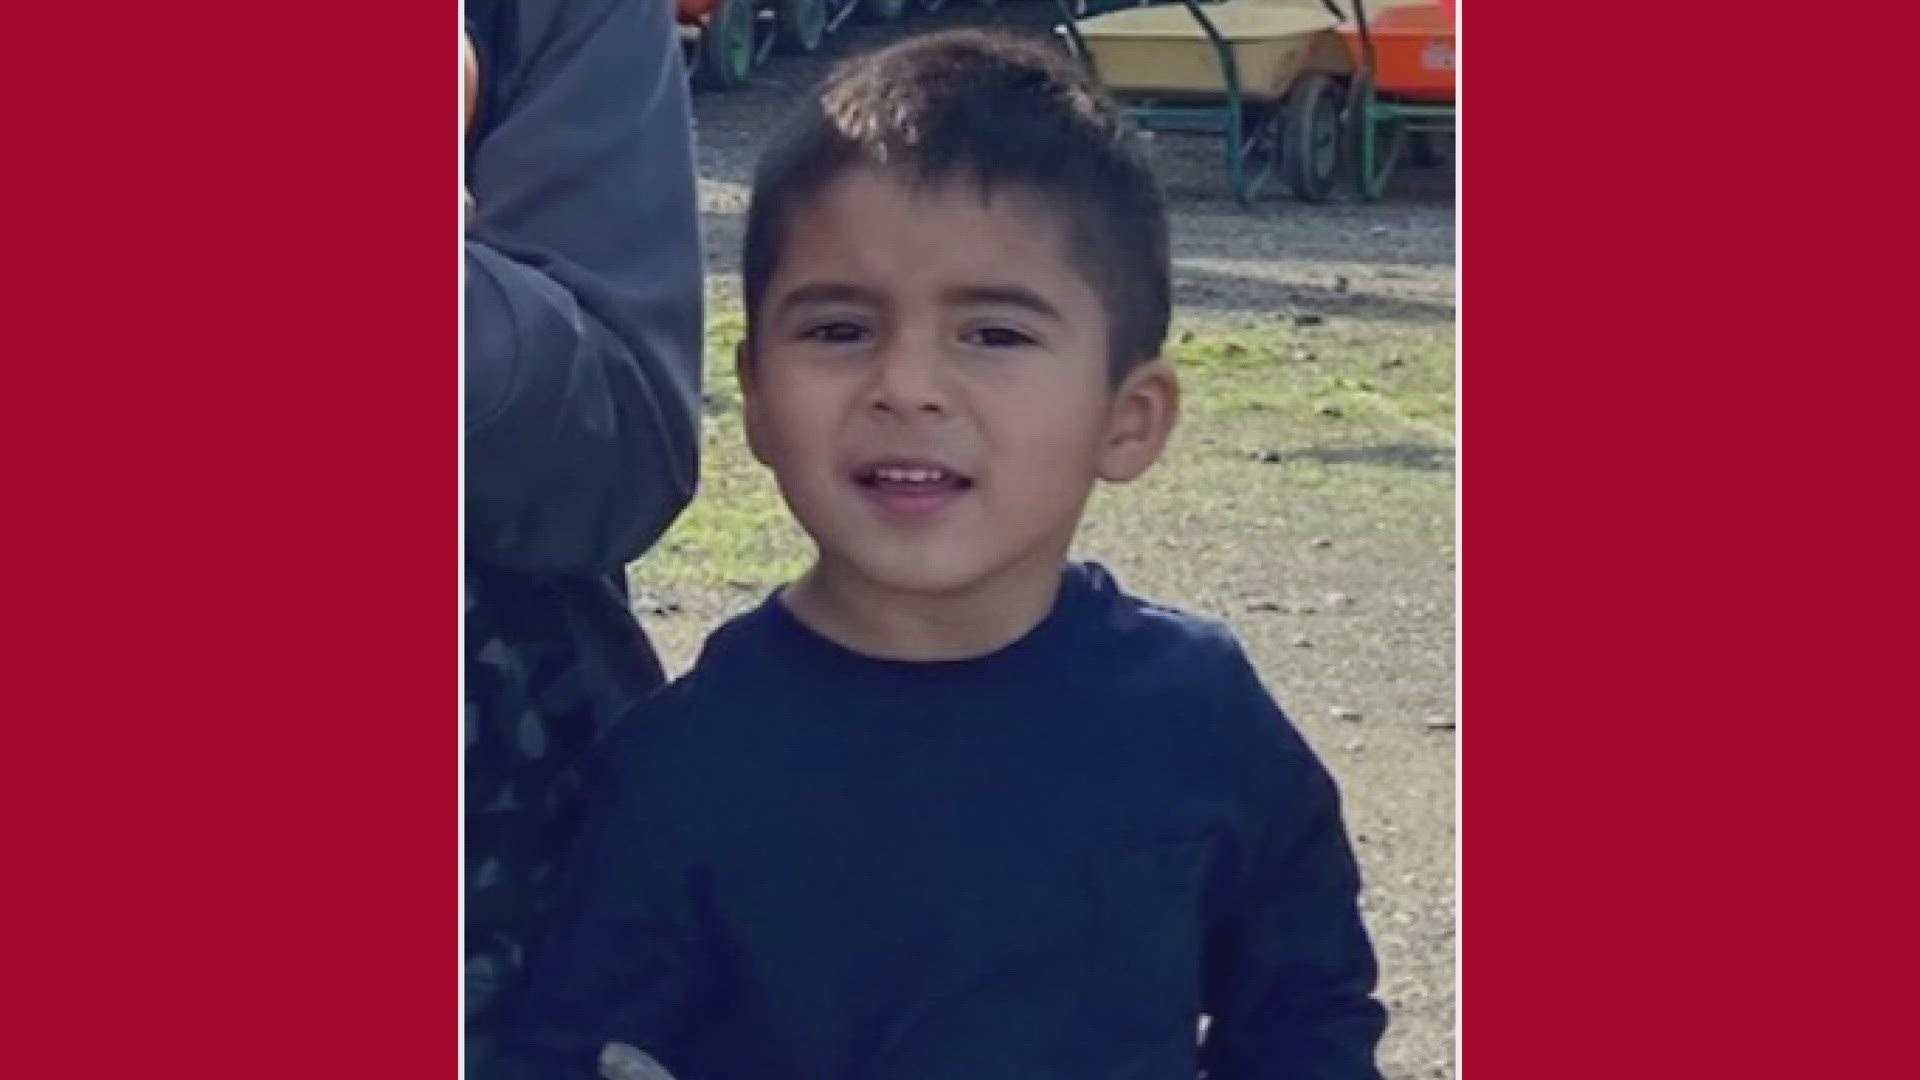 Everett police are searching for missing 4-year-old Ariel Garcia, who they say could be in danger. He was last seen at 7 AM Wednesday morning.